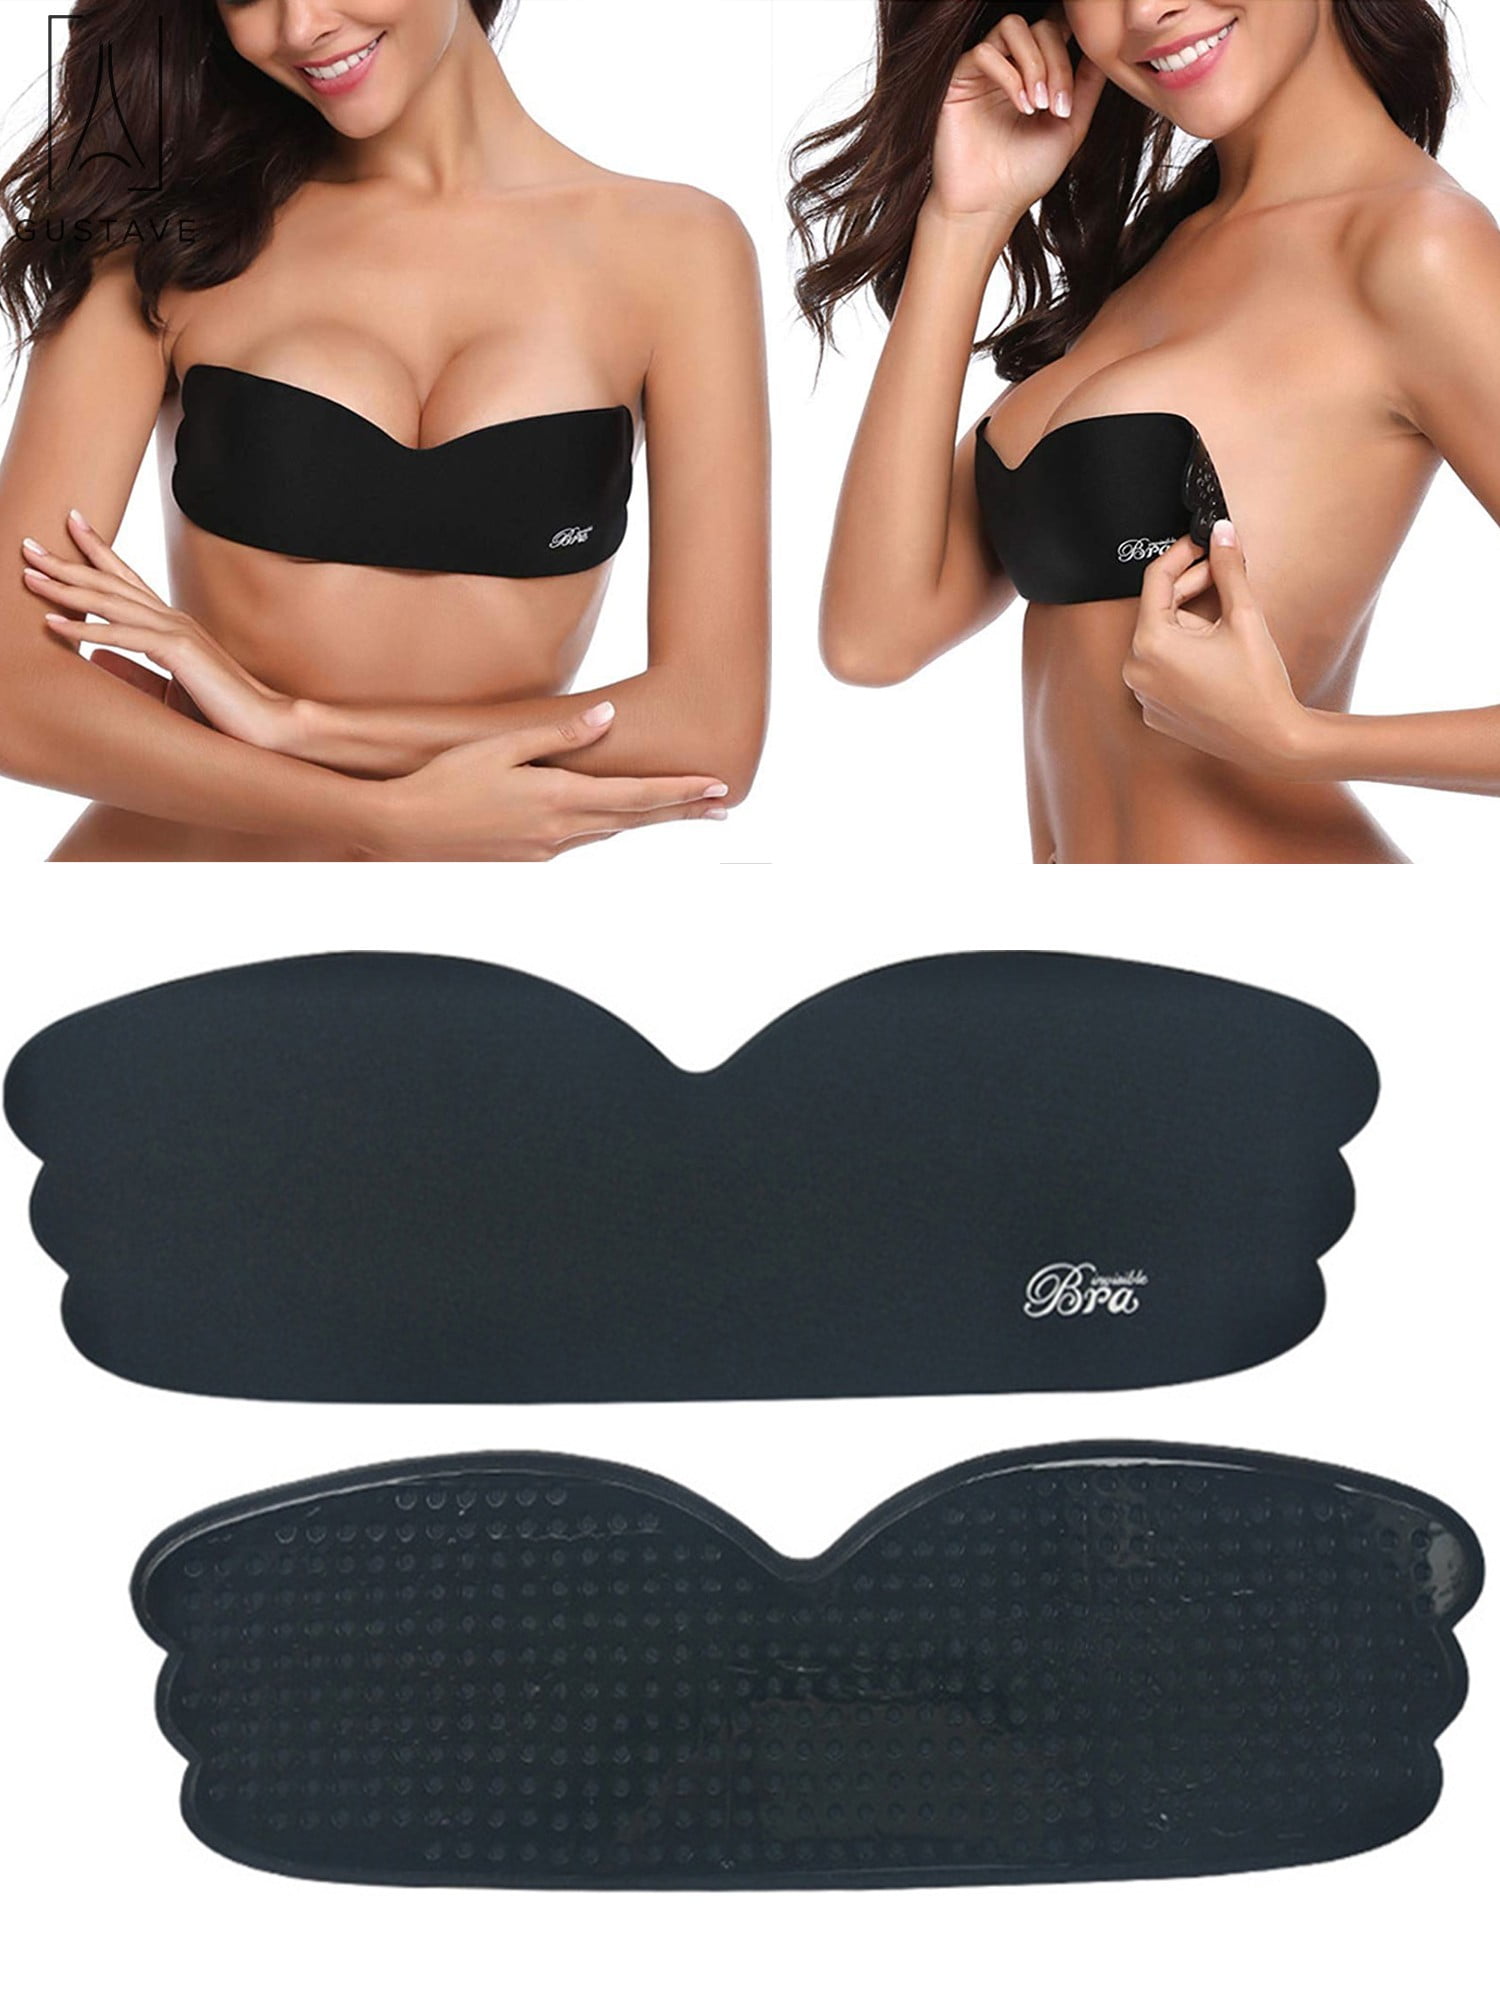 1 Best Seller Backless Push Up Bra with Inflatable Cups for Perfect  Cleavage(Size B, Black)